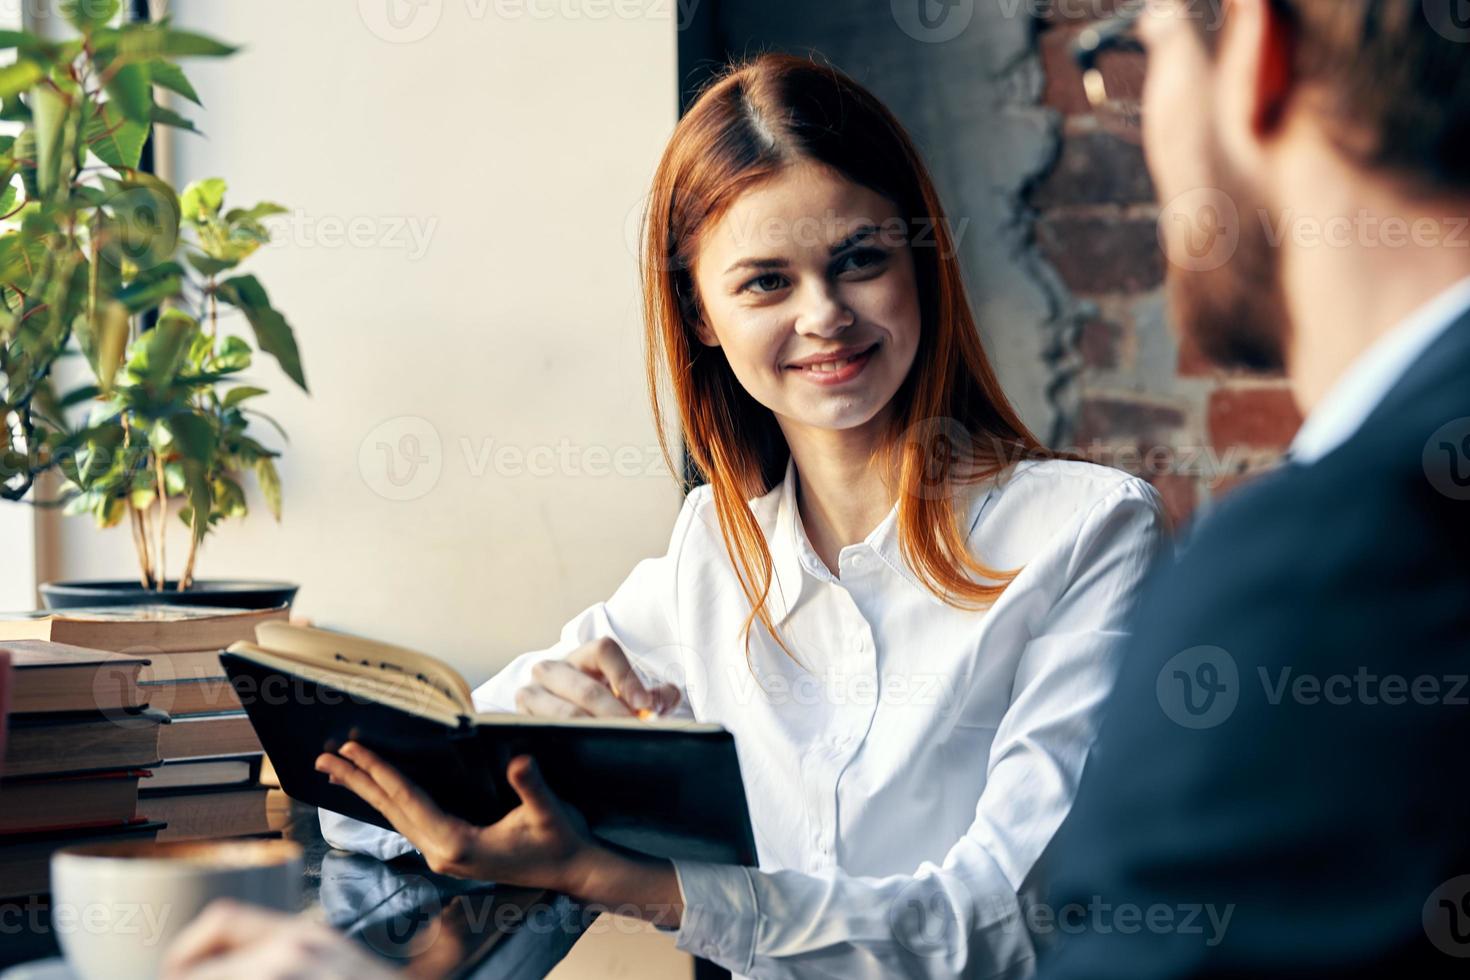 business man and woman chatting in a cafe work lifestyle photo